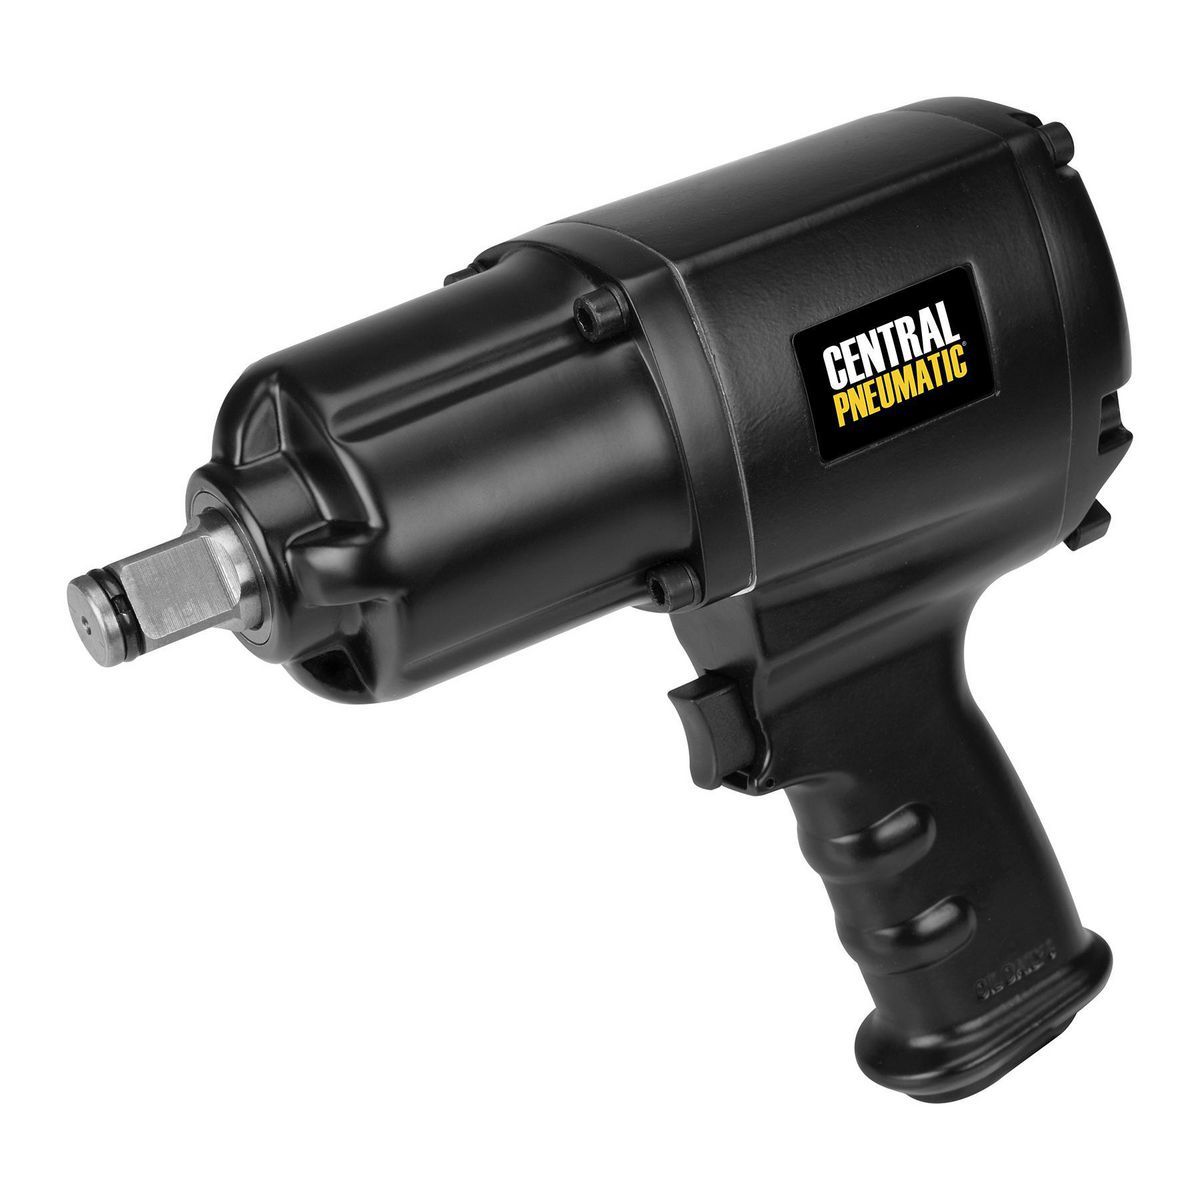 CENTRAL PNEUMATIC 3/4" Air Impact Wrench